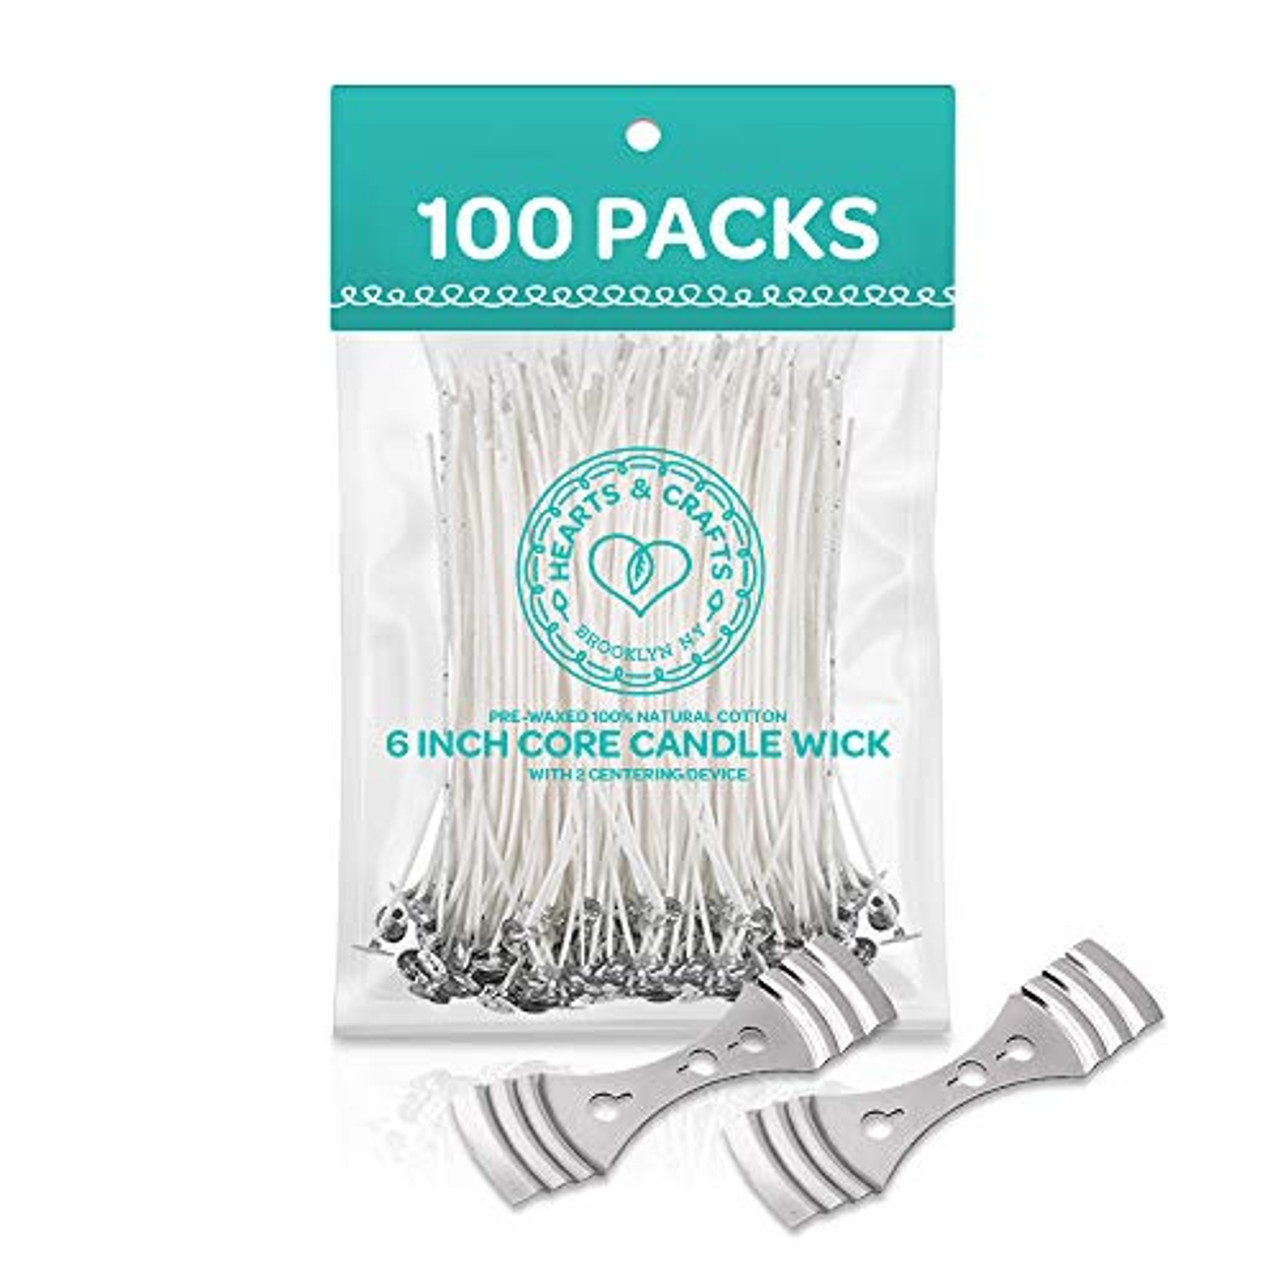 Candle Wicks - 100% Natural Cotton, Pre-Waxed, Low Smoke 6 Wicks